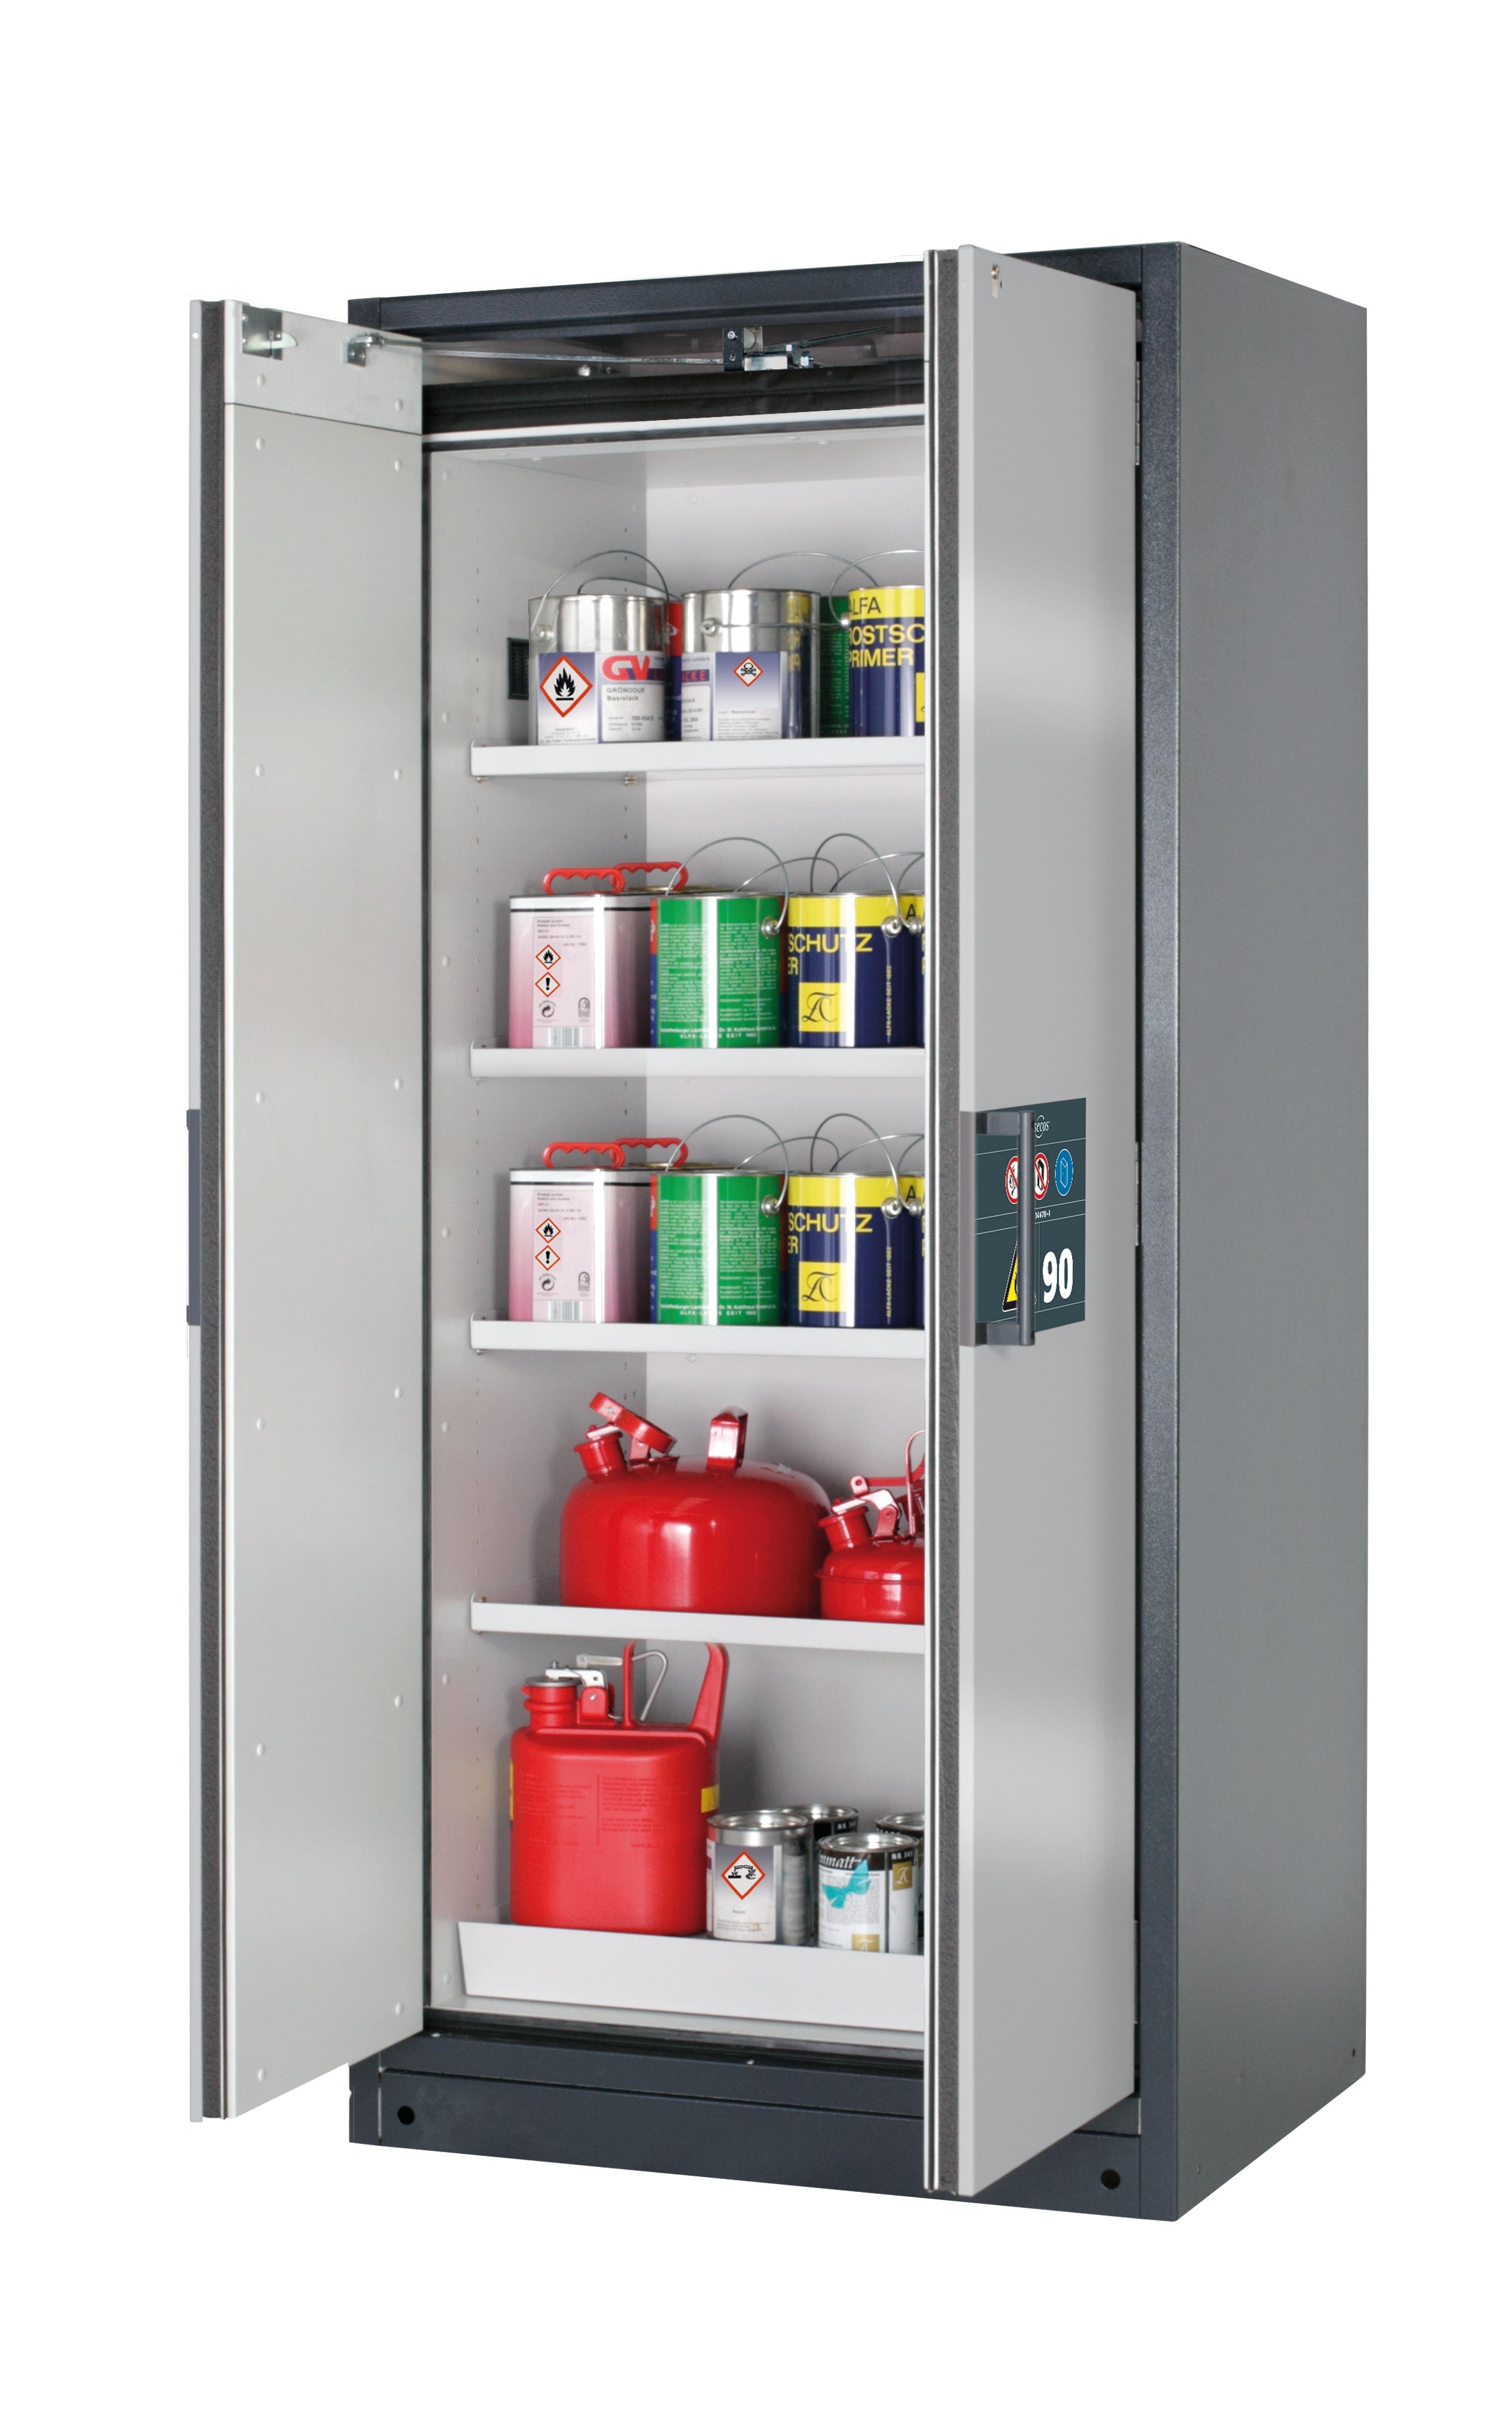 Type 90 safety storage cabinet Q-PEGASUS-90 model Q90.195.090.WDAC in asecos silver with 4x shelf standard (sheet steel),